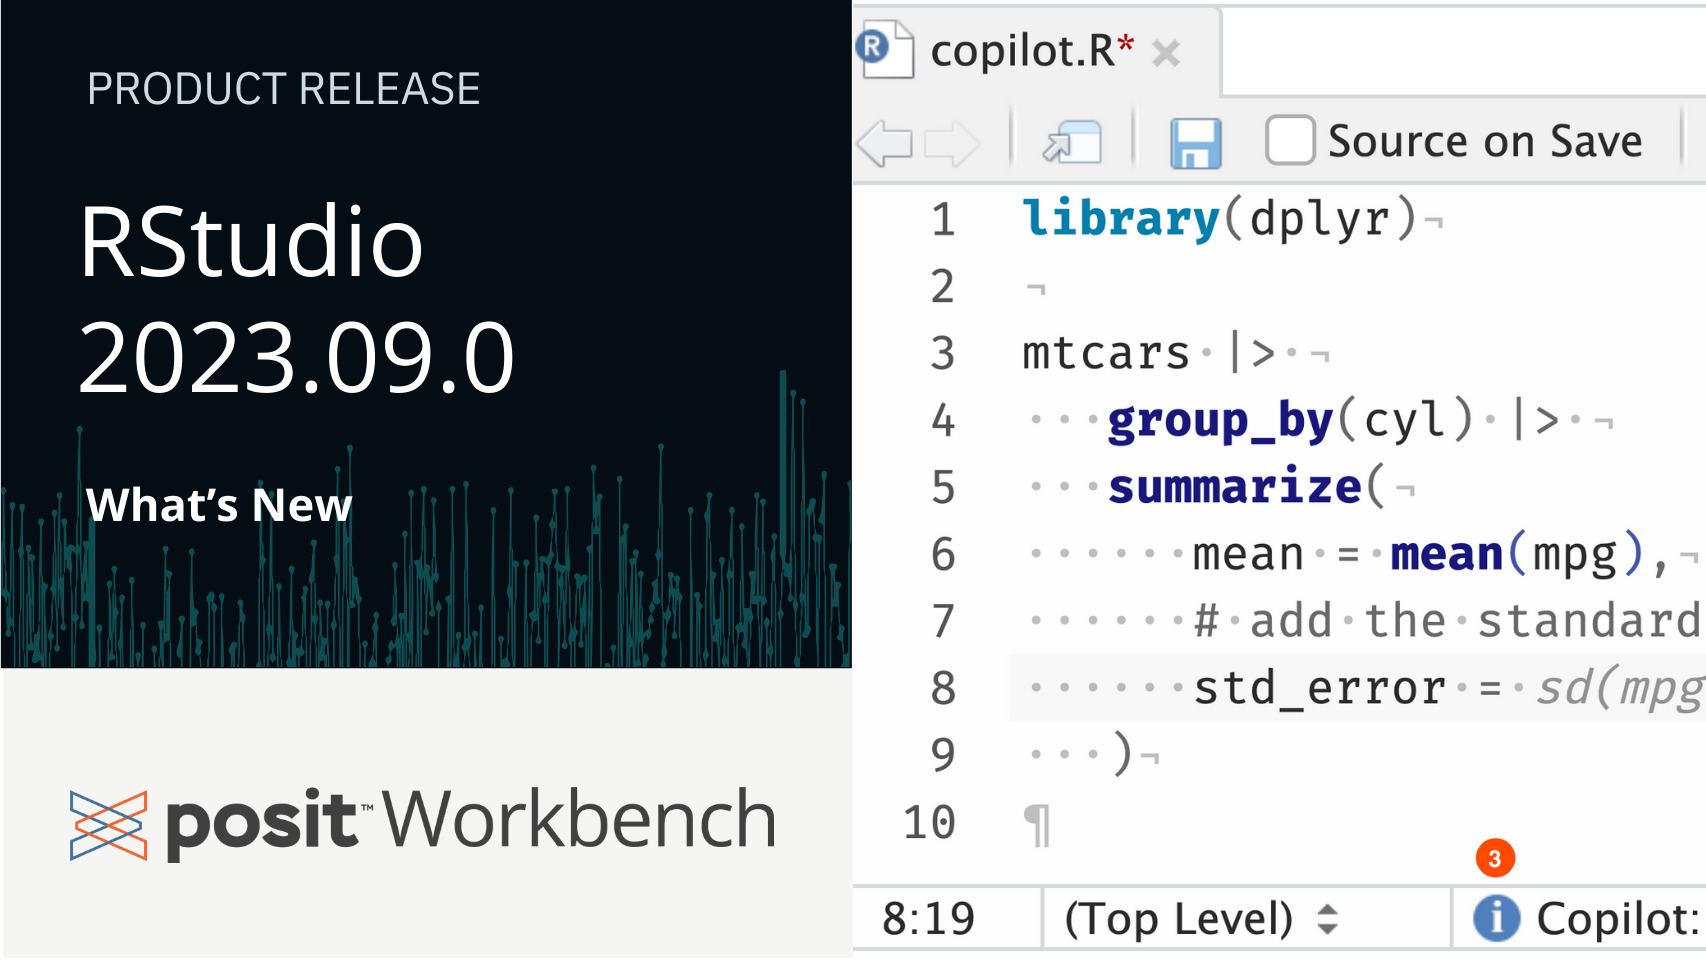 Text: RStudio 2023.09.0 What's New Product release. An image of GitHub COpilot in RStudio.